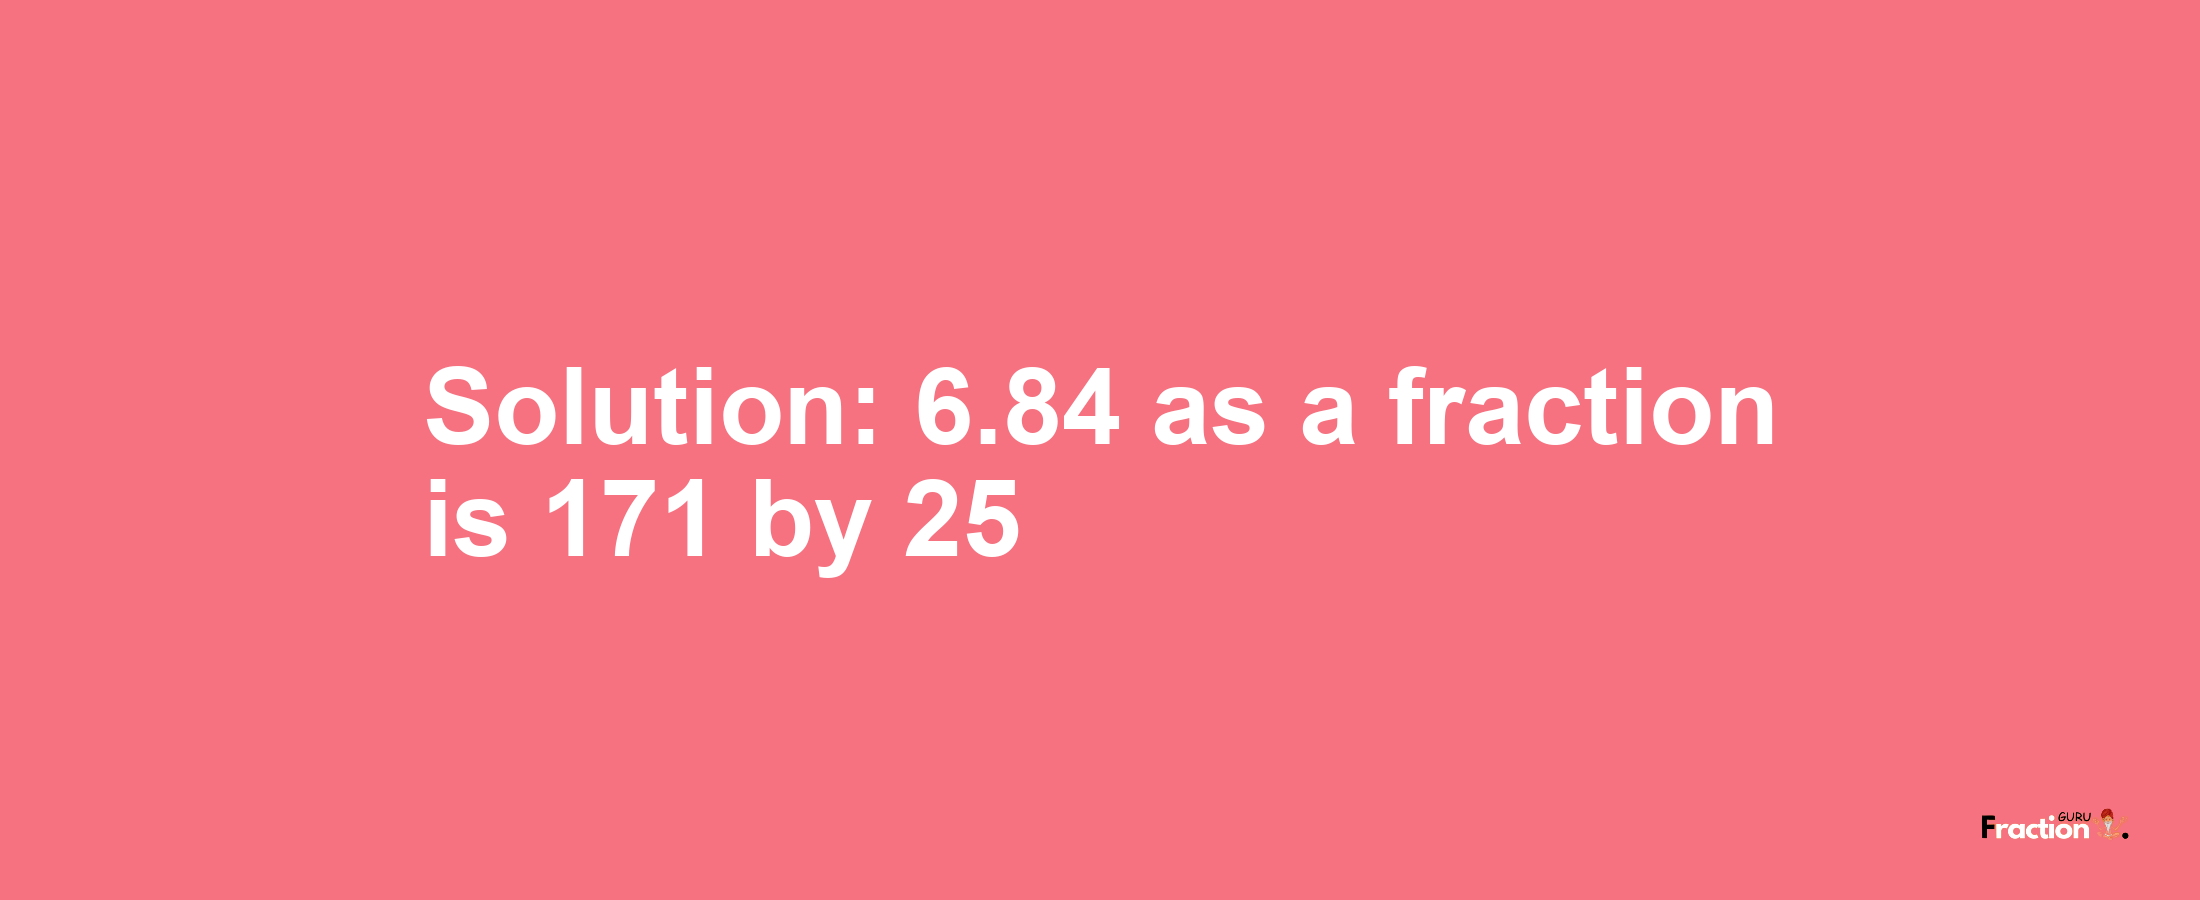 Solution:6.84 as a fraction is 171/25